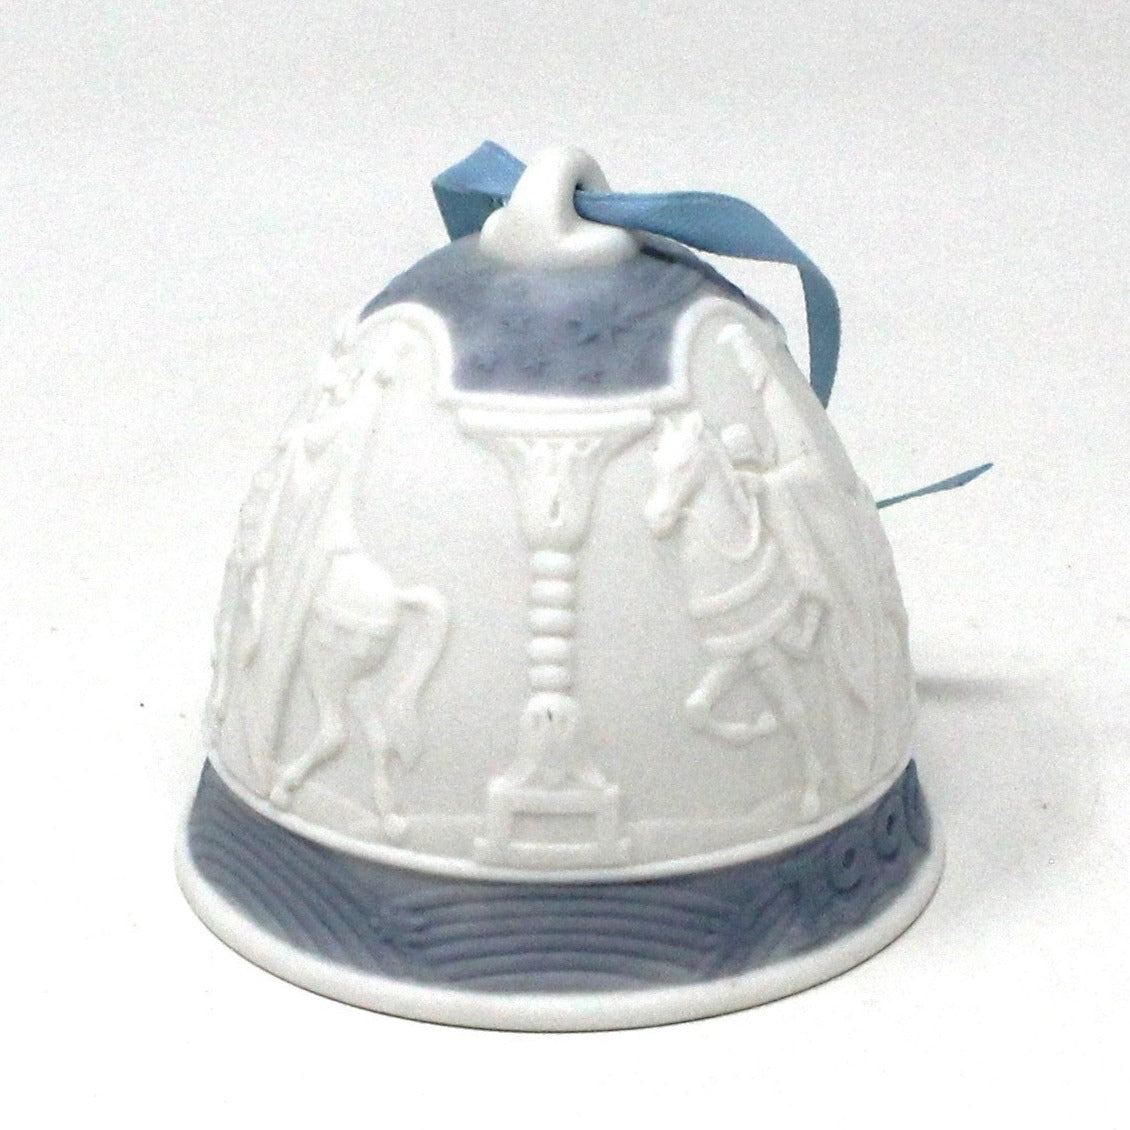 Ornament, Lladro, Annual Christmas Bell, Blue 1990, Porcelain, Vintage, SOLD